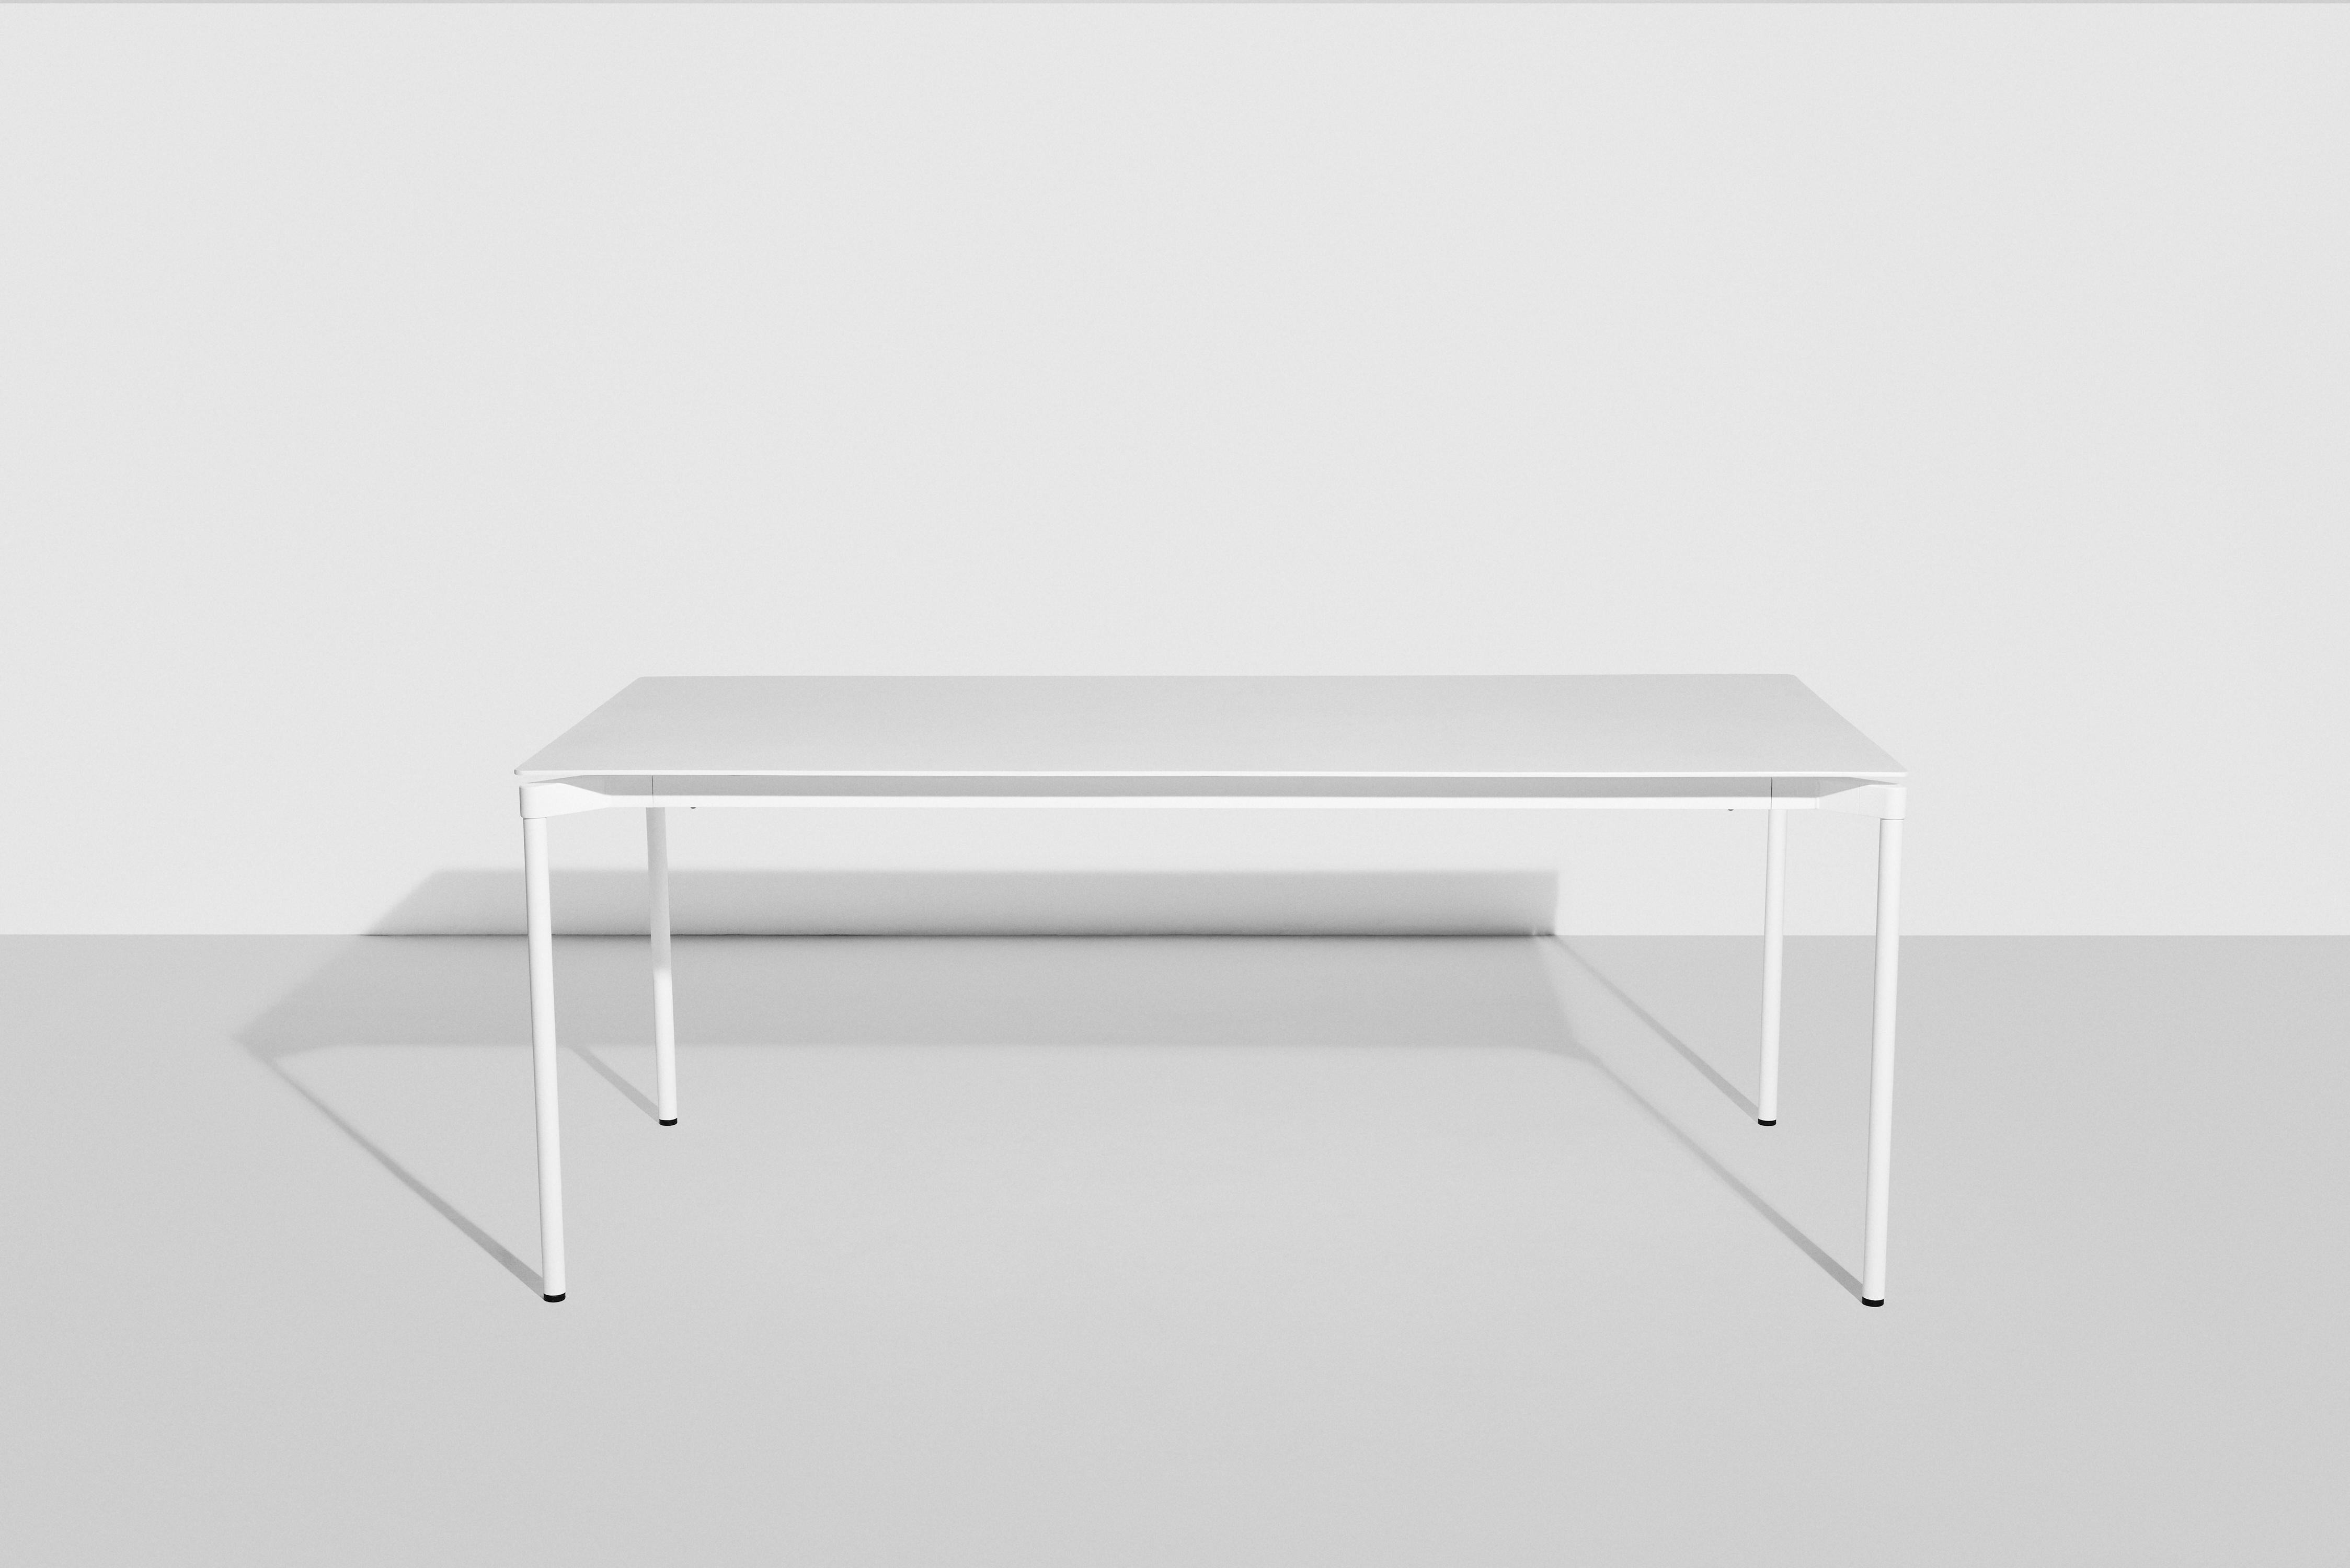 Petite Friture Fromme Rectangular Table in White Aluminium by Tom Chung, 2020

The Fromme collection stands out by its pure line and compact design. Absorbers placed under the seating gives a soft and very comfortable flexibility to seats. Made